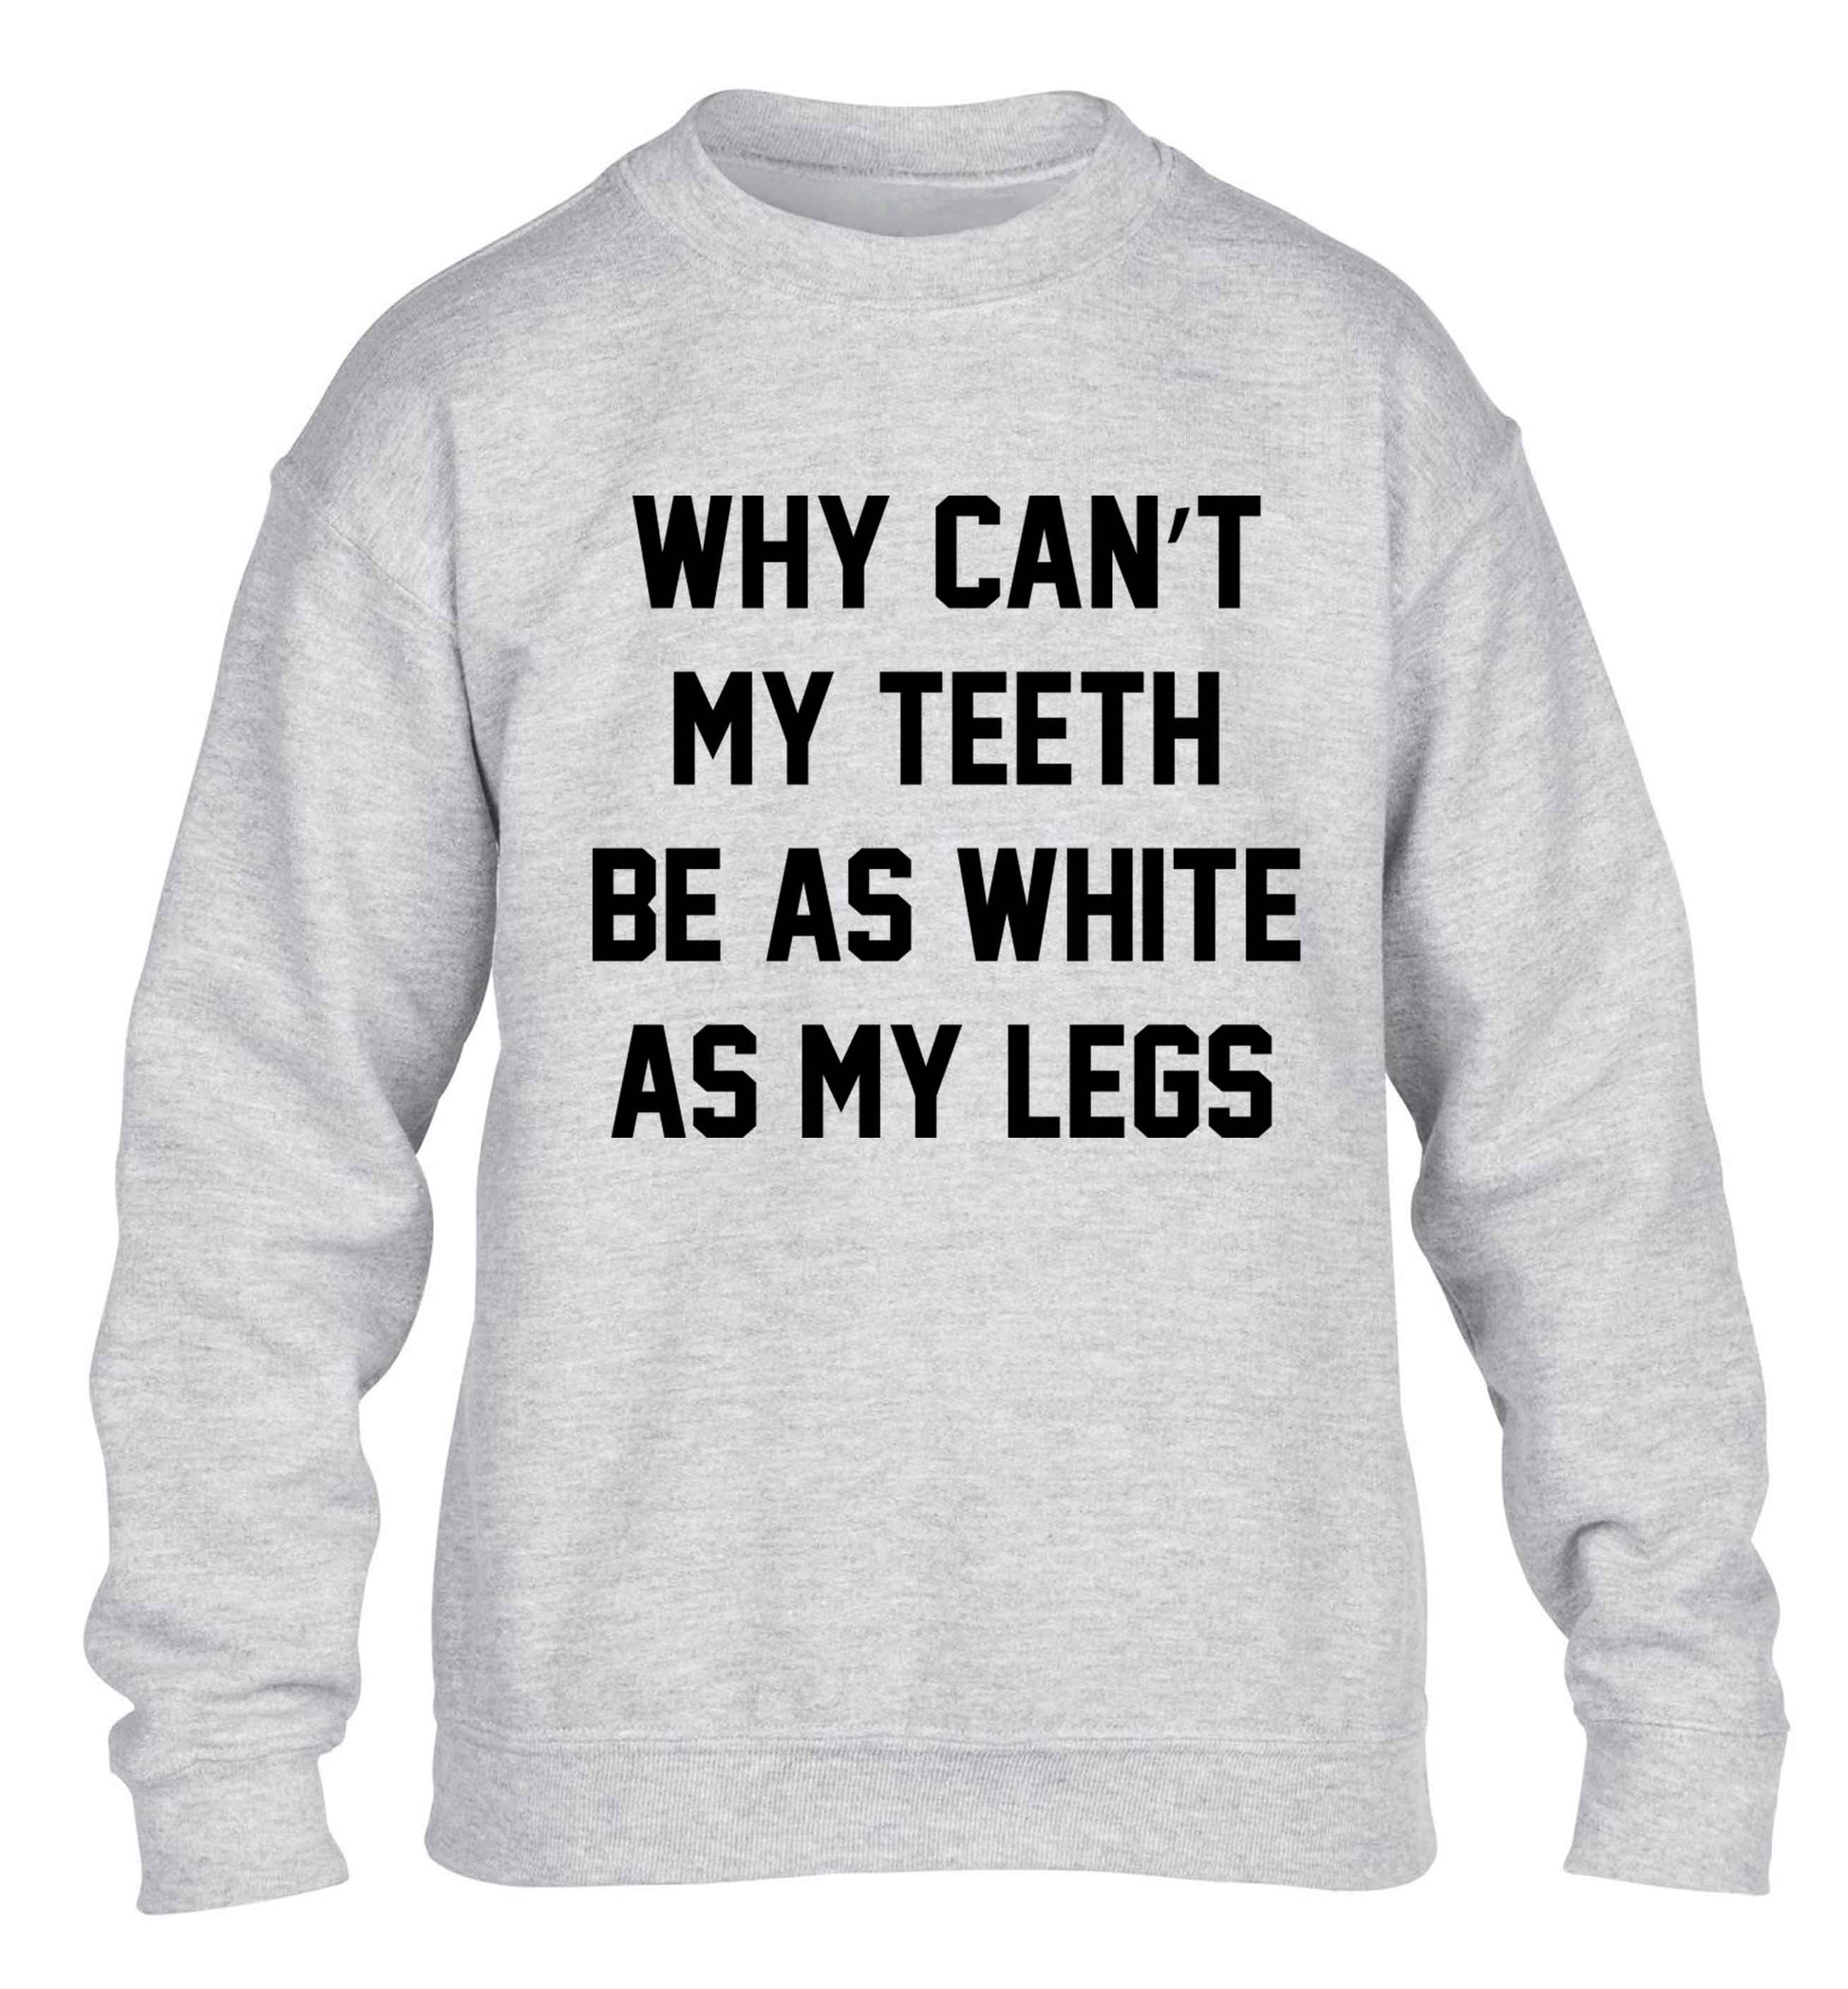 Why can't my teeth be as white as my legs children's grey sweater 12-13 Years